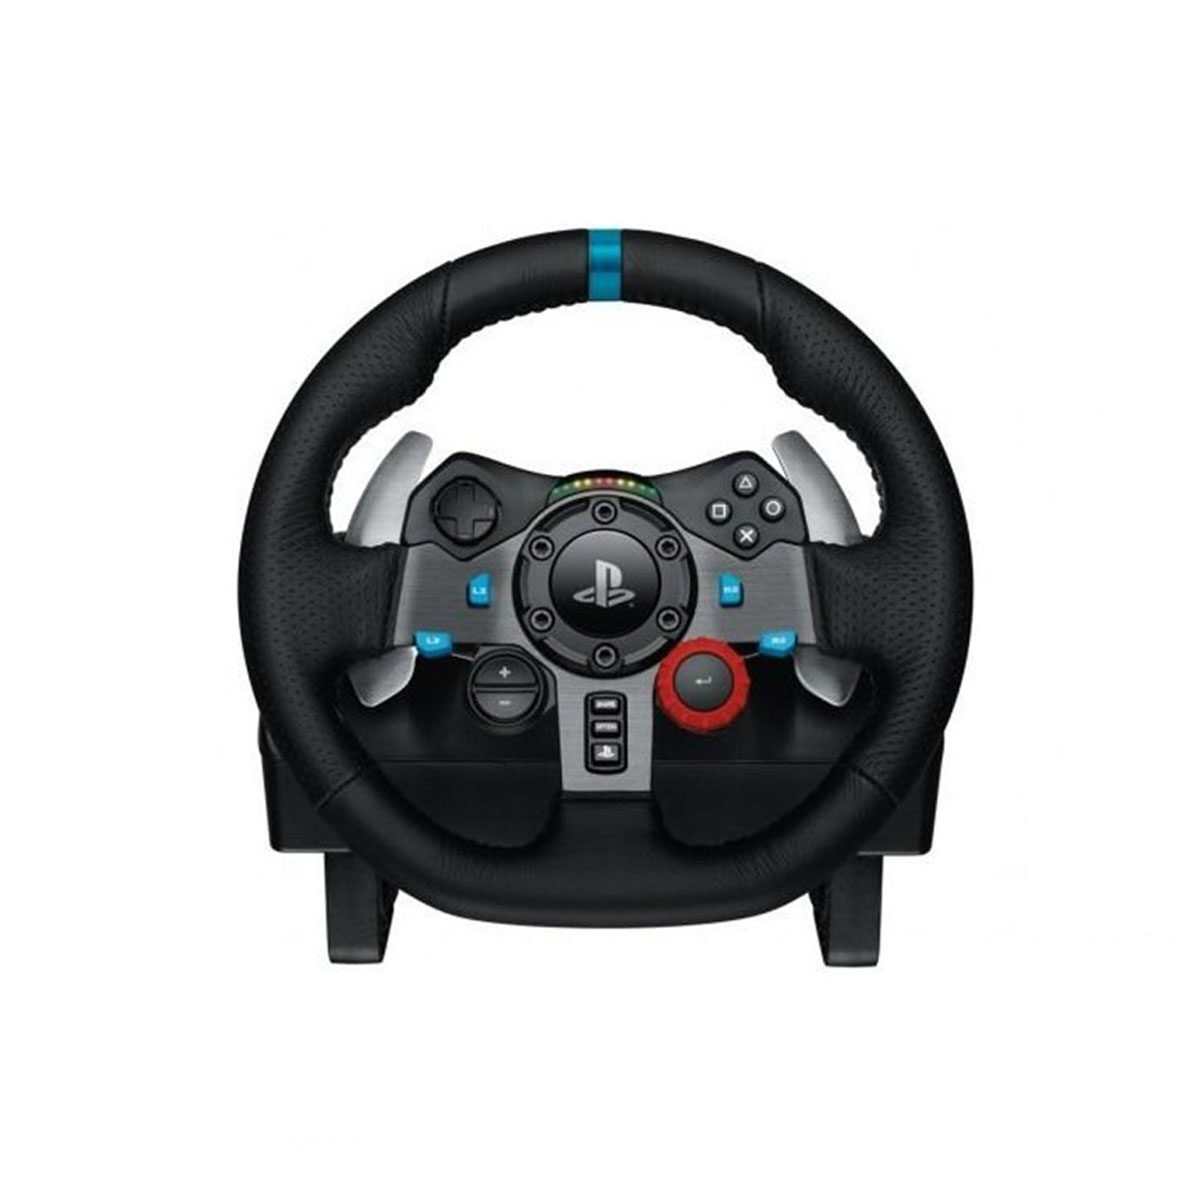 LOGITECH G29 DRIVING FORCE RACING WHEEL FOR PS4,PS3 AND PC